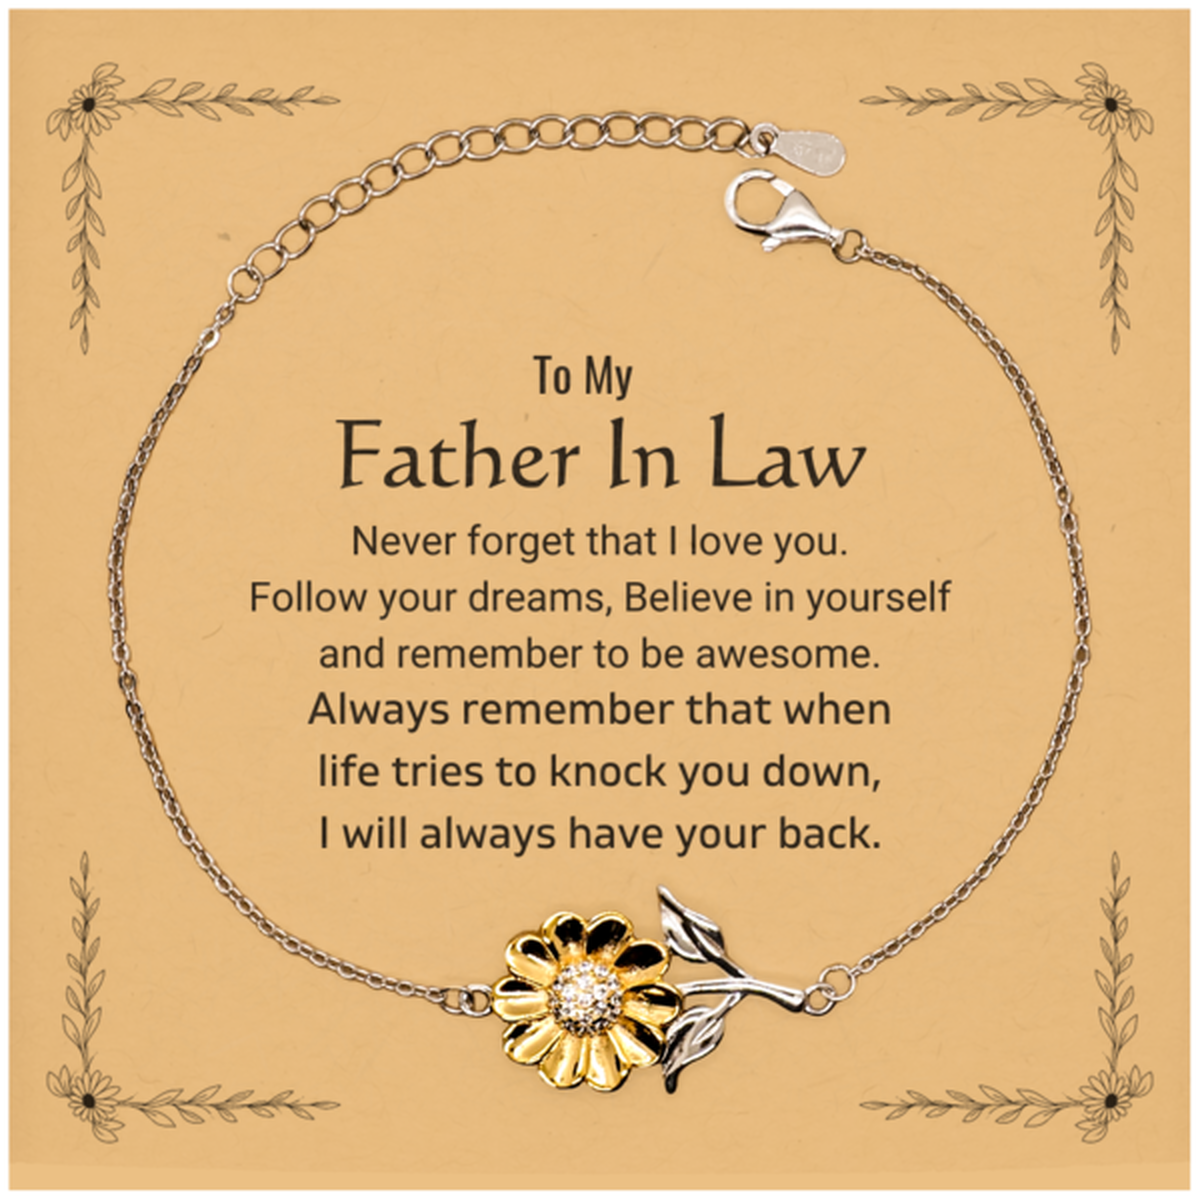 Inspirational Gifts for Father In Law, Follow your dreams, Believe in yourself, Father In Law Sunflower Bracelet, Birthday Christmas Unique Gifts For Father In Law